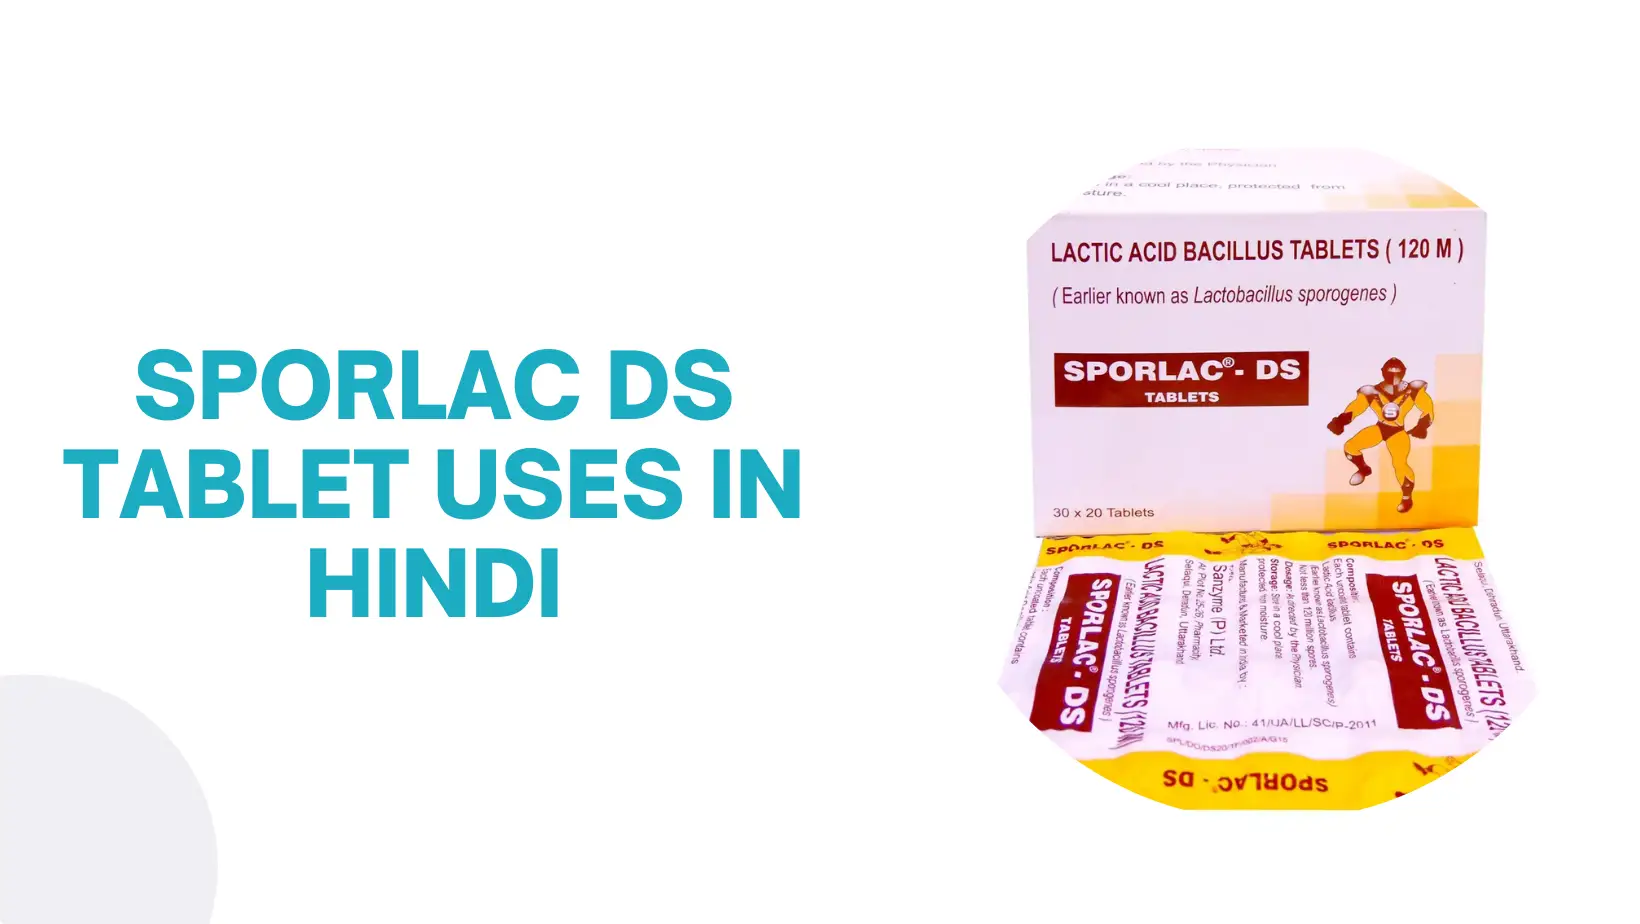 Sporlac Ds Tablet Uses In Hindi